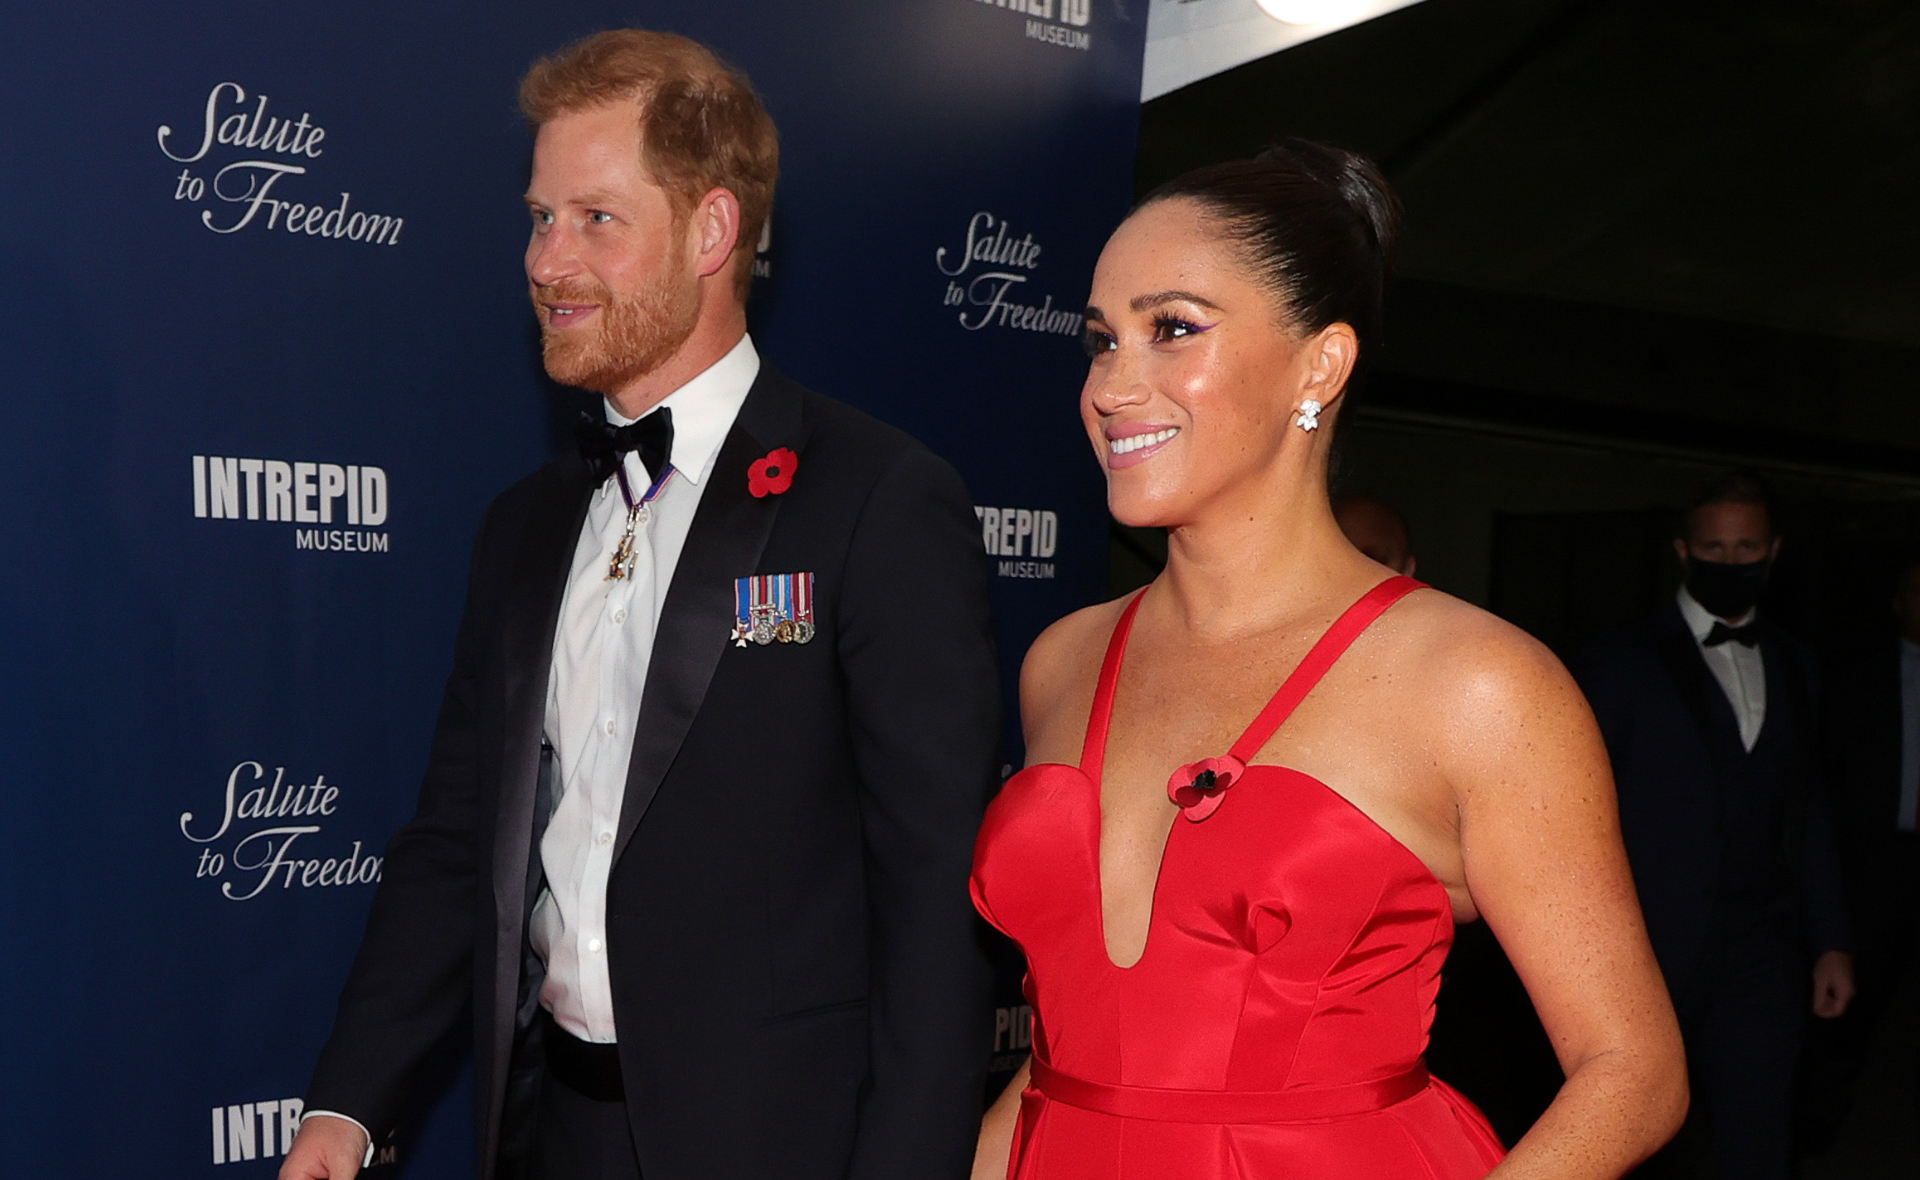 Prince Harry and Meghan Markle secure film adaptation rights to romantic novel